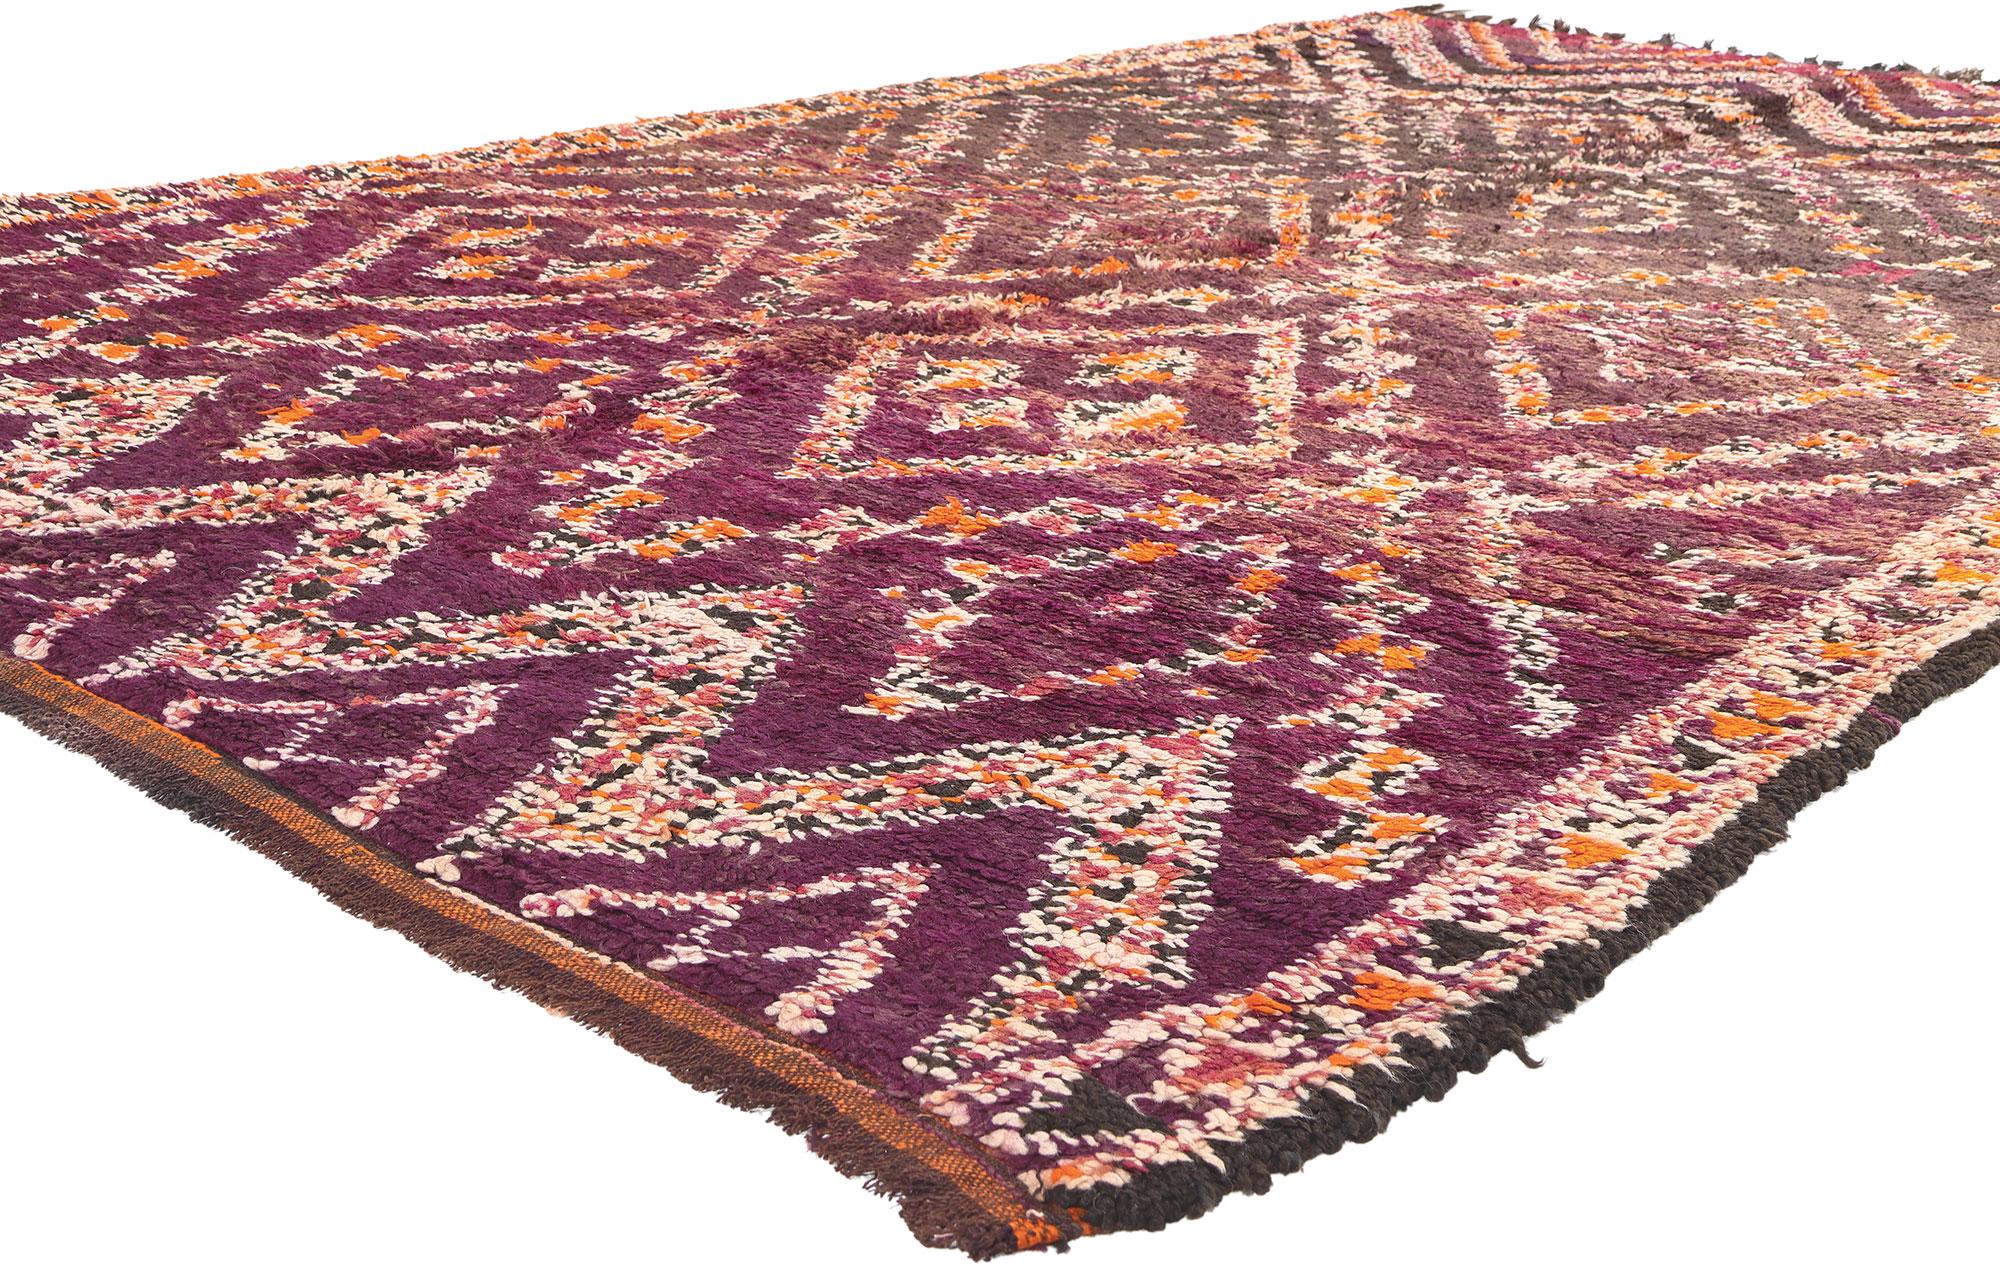 20090 Vintage Beni MGuild Moroccan Rug, 06'07 x 11'07.
Embark on a journey through woven beauty with this hand-knotted wool vintage Beni MGuild Moroccan rug, an eloquent testament to bold design, intricate detail, and captivating texture. The